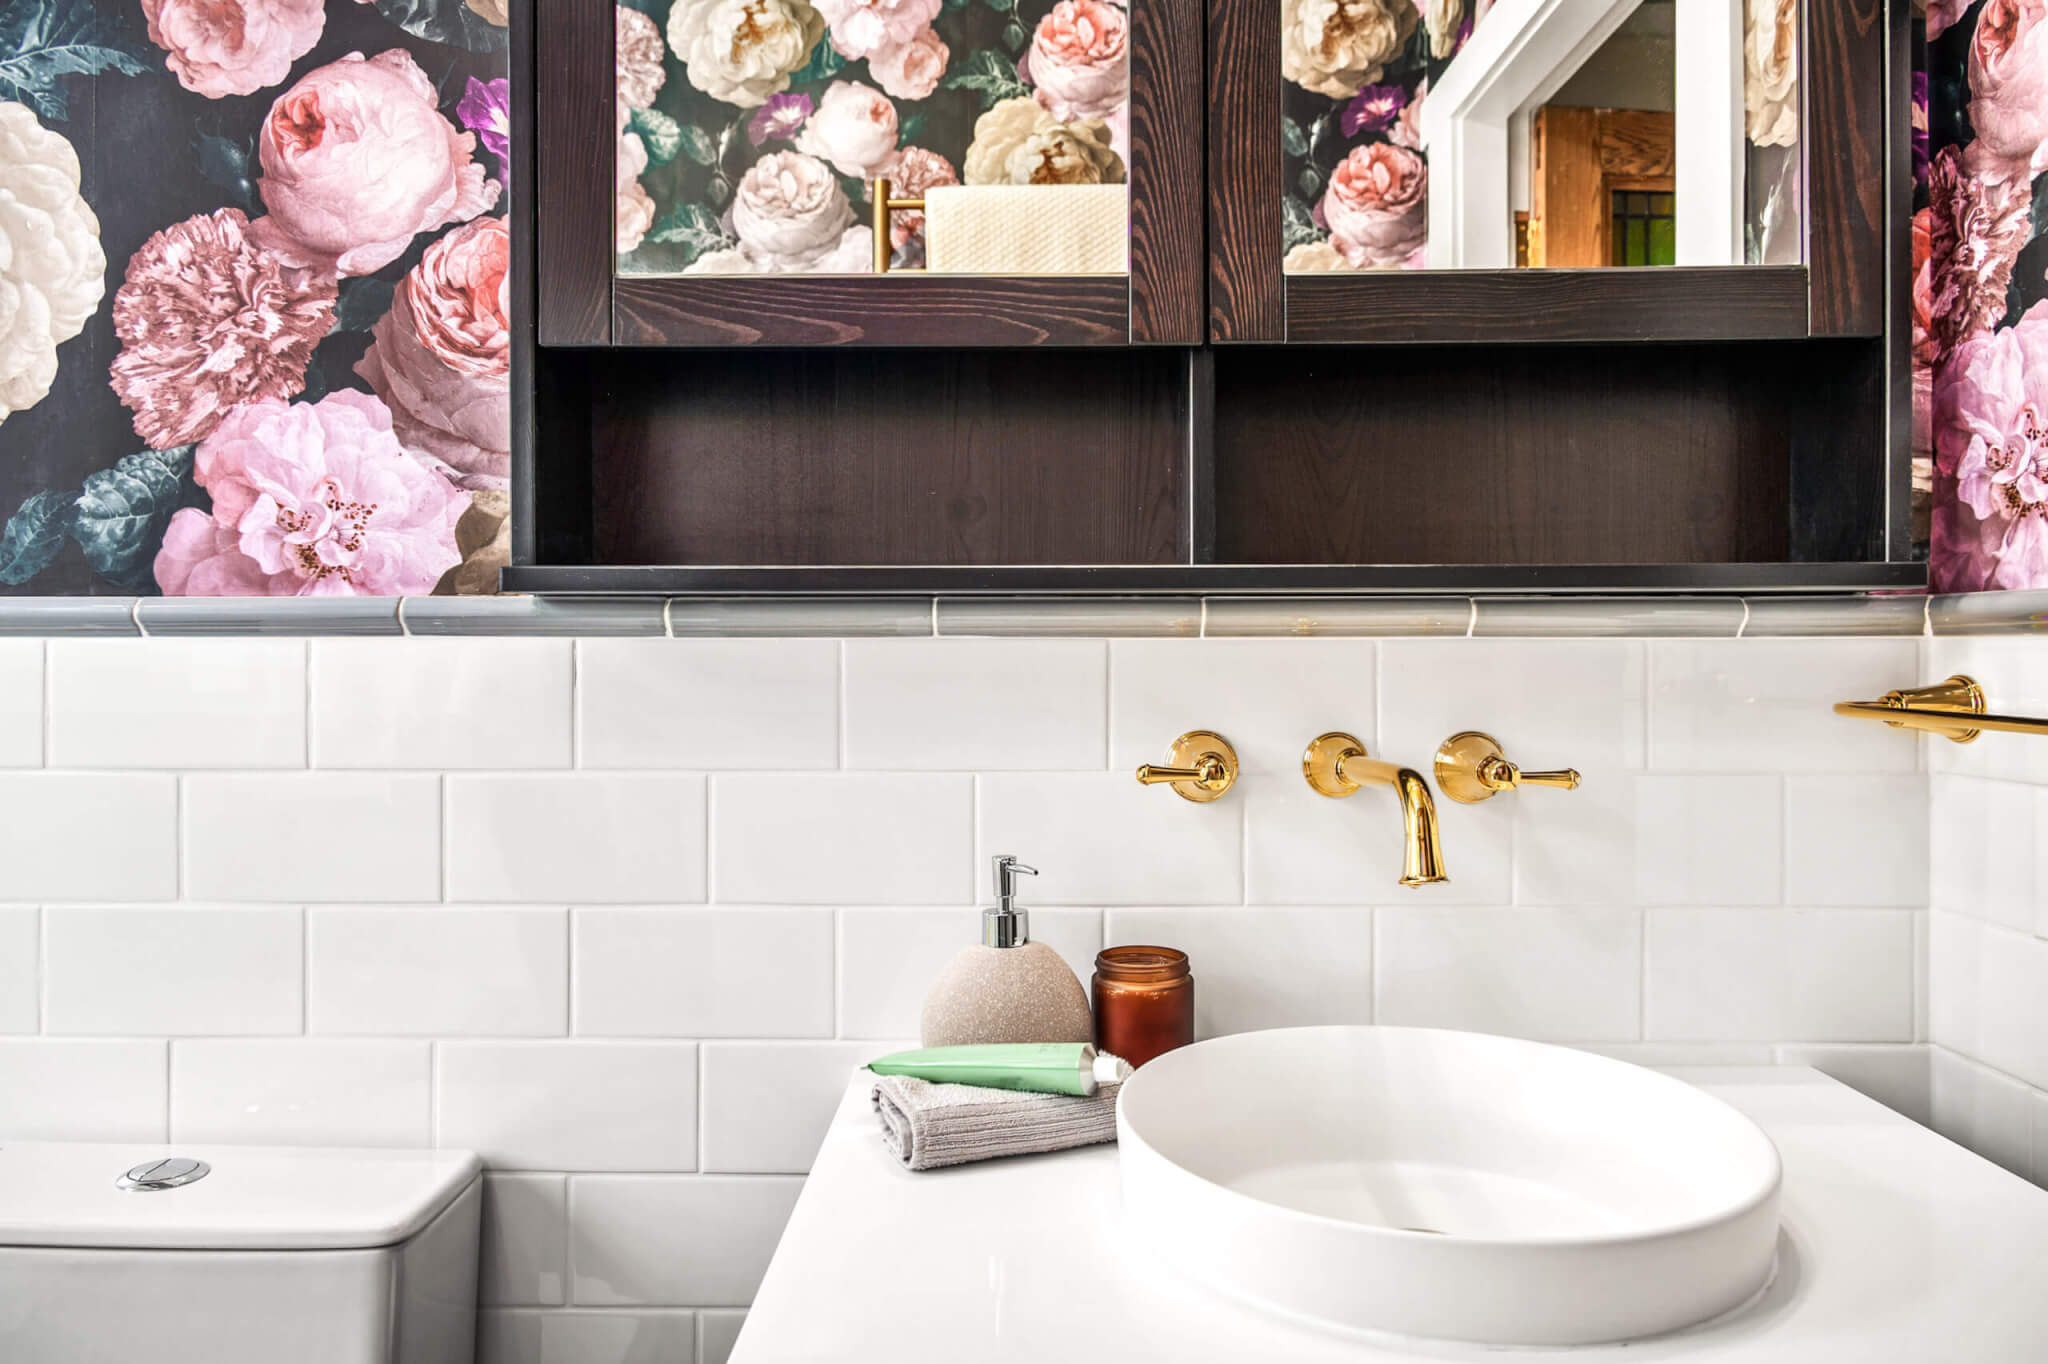 7 Ways to Style Up and Maximise Your Small Bathroom Space